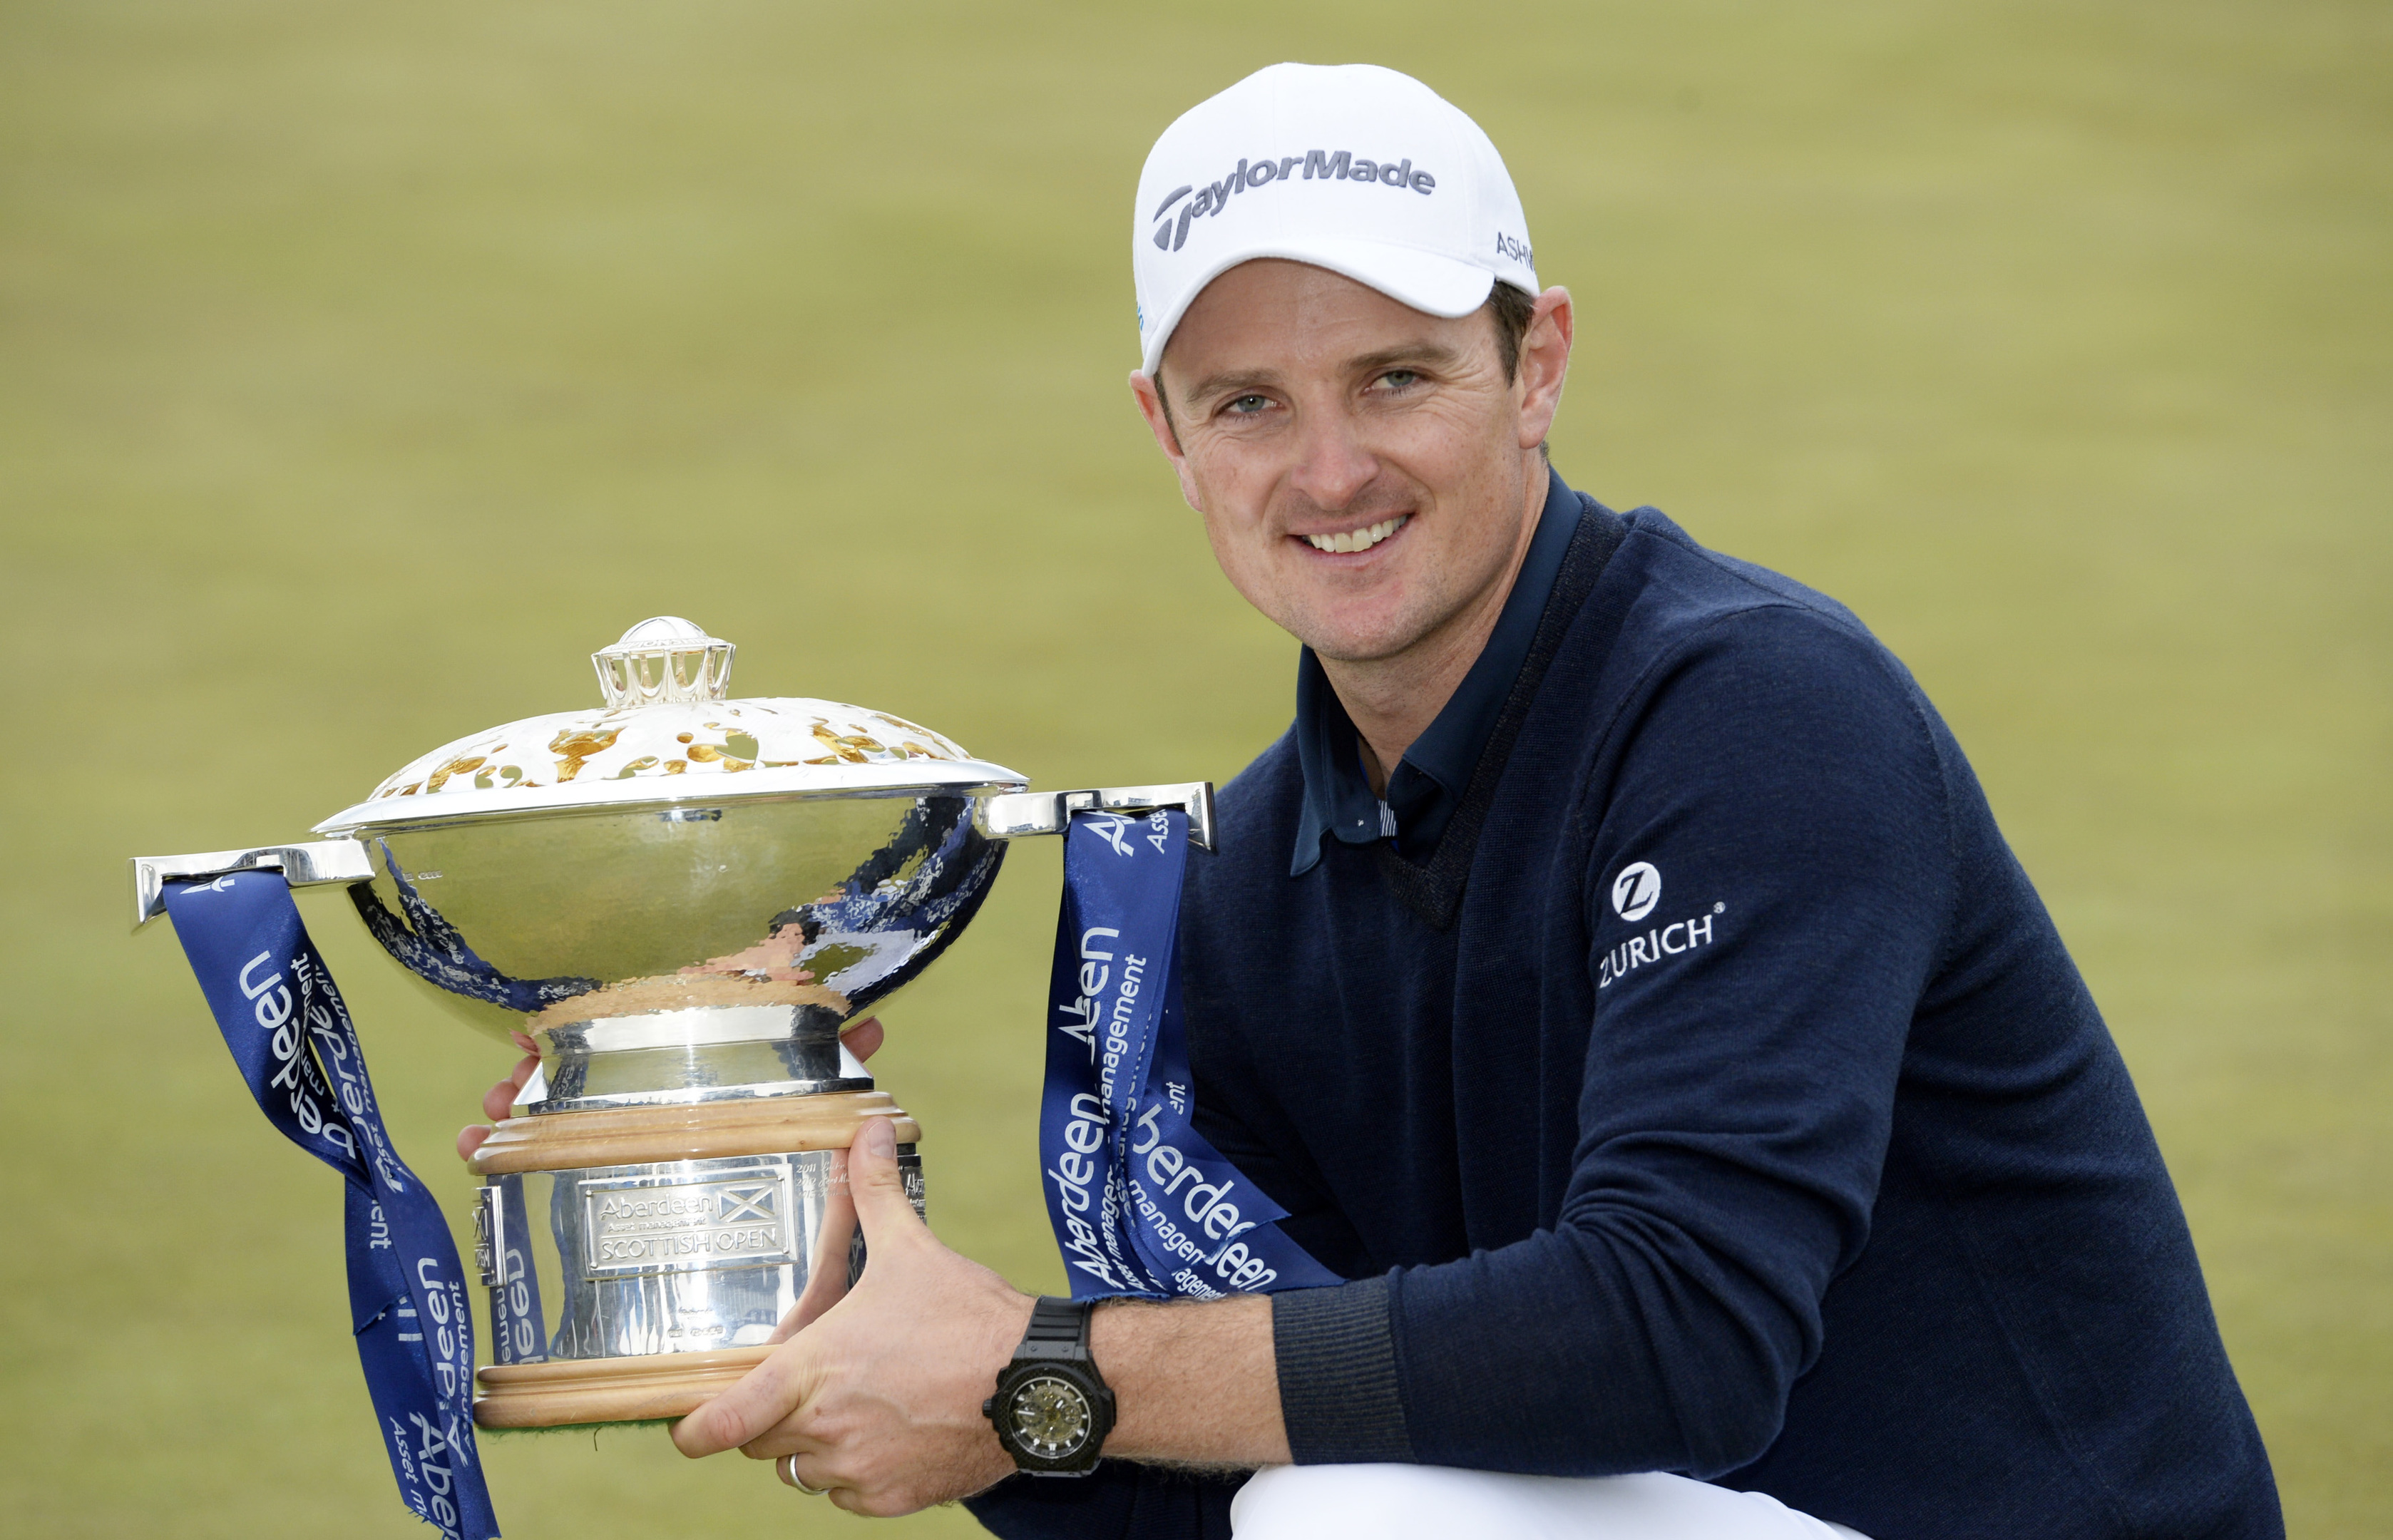 Justin Rose is hoping to get his hands on the Scottish Open trophy again at Gullane in July.